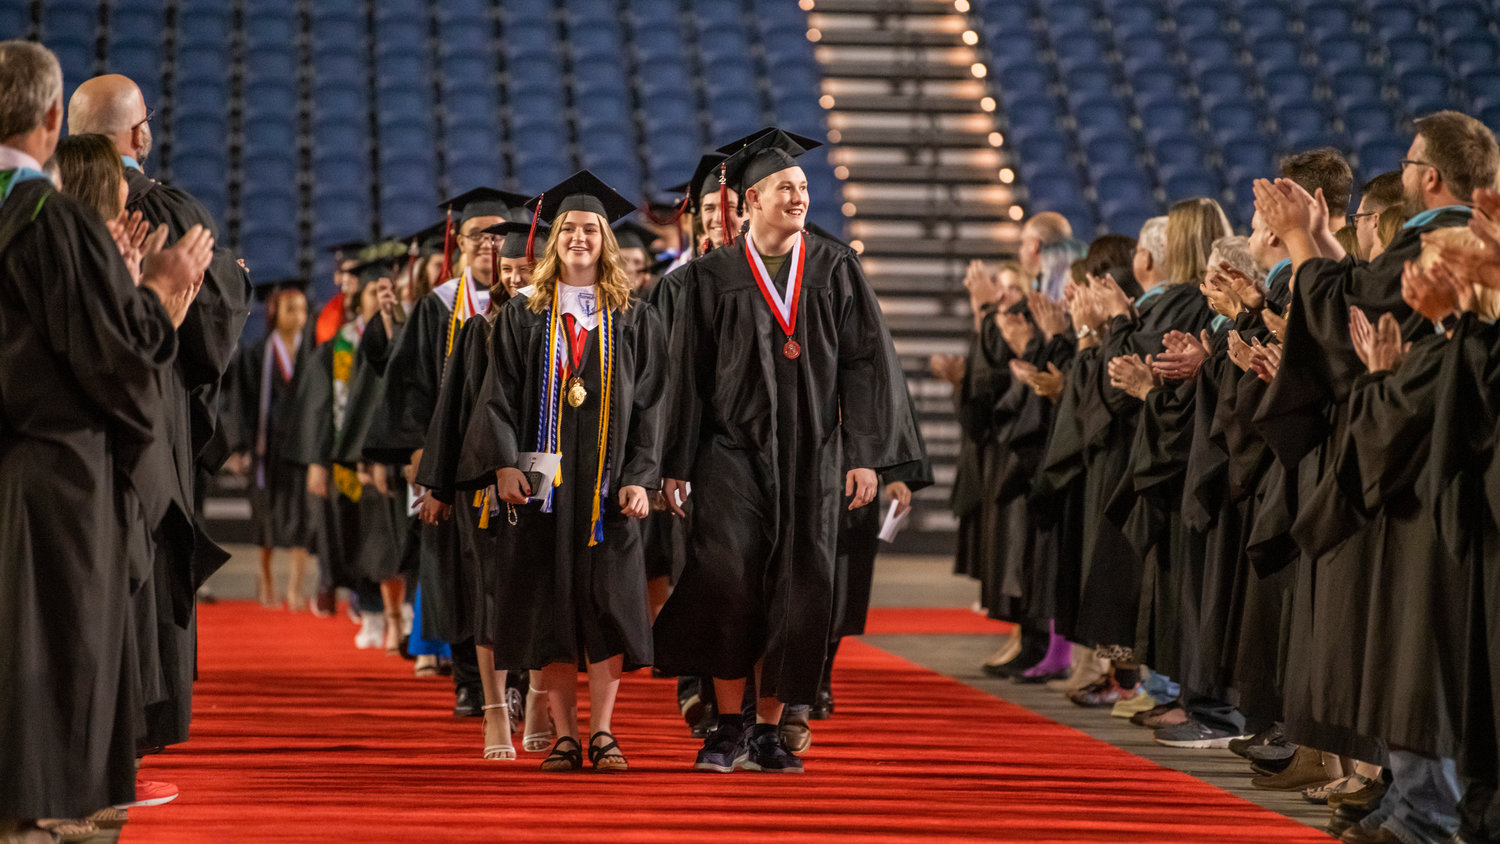 Students walk through the Tacoma Dome during their graduation ceremony on June 16.